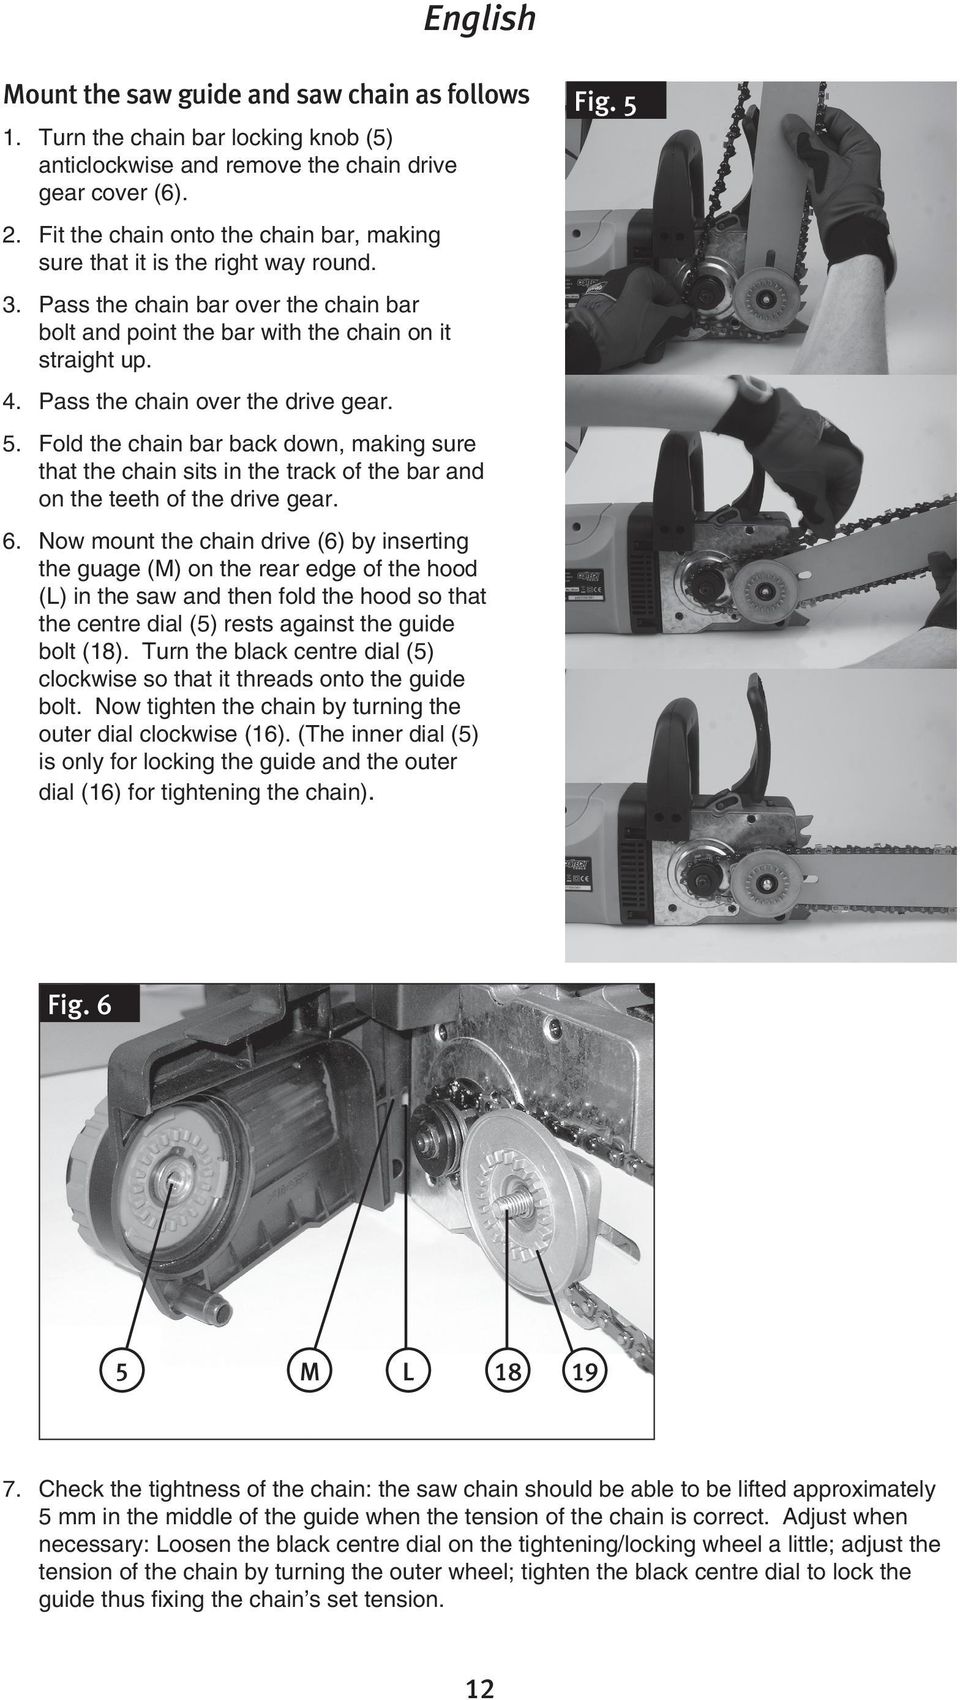 Pass the chain over the drive gear. 5. Fold the chain bar back down, making sure that the chain sits in the track of the bar and on the teeth of the drive gear. 6.